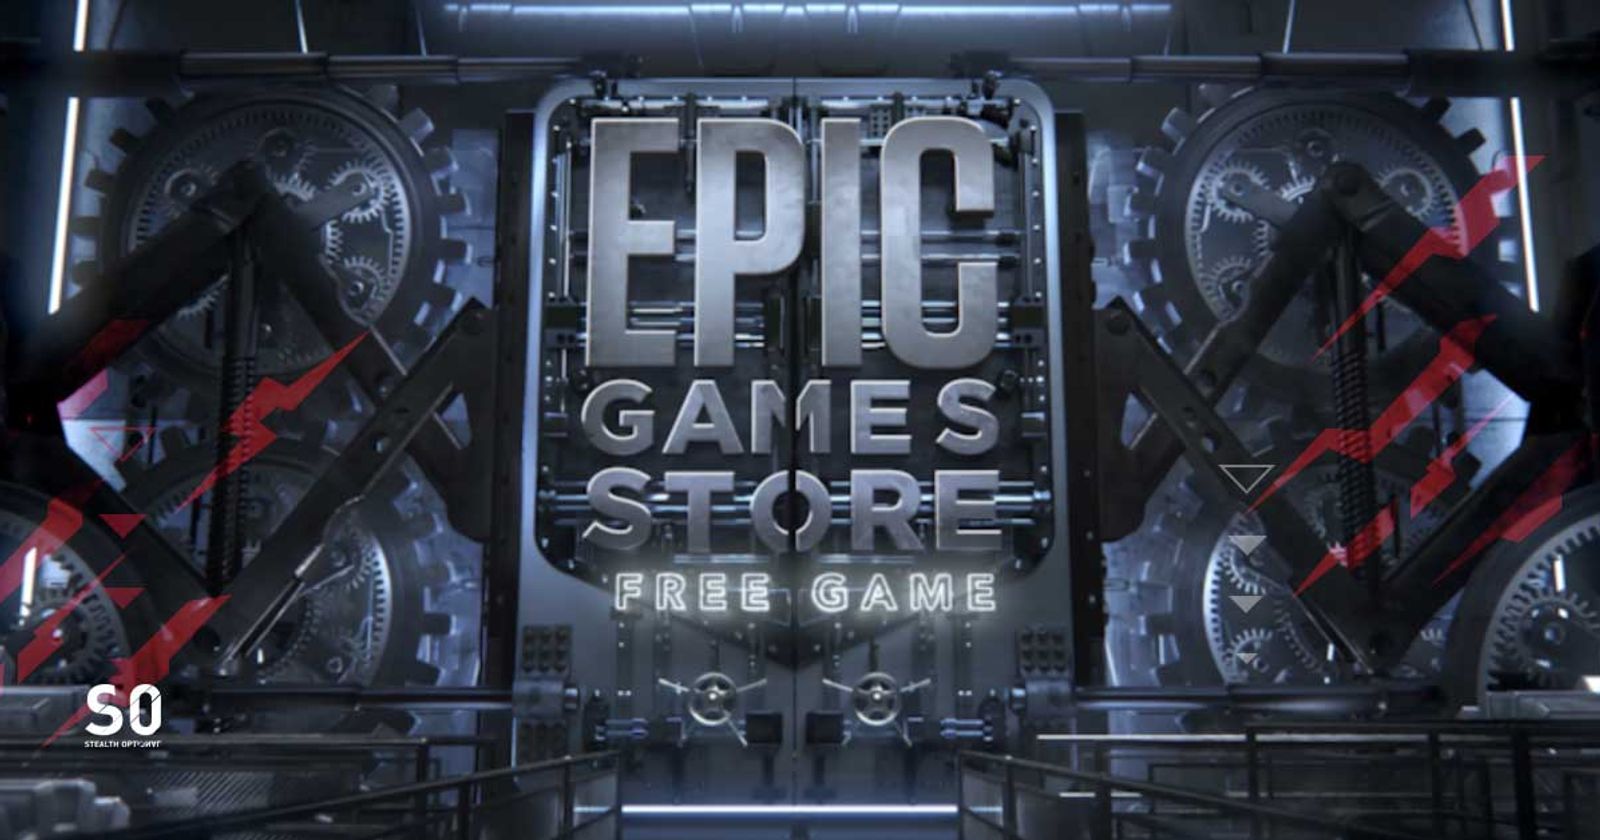 How To Get 15 FREE Games On The Epic Games Store! (15 Days Of FREE Games) 